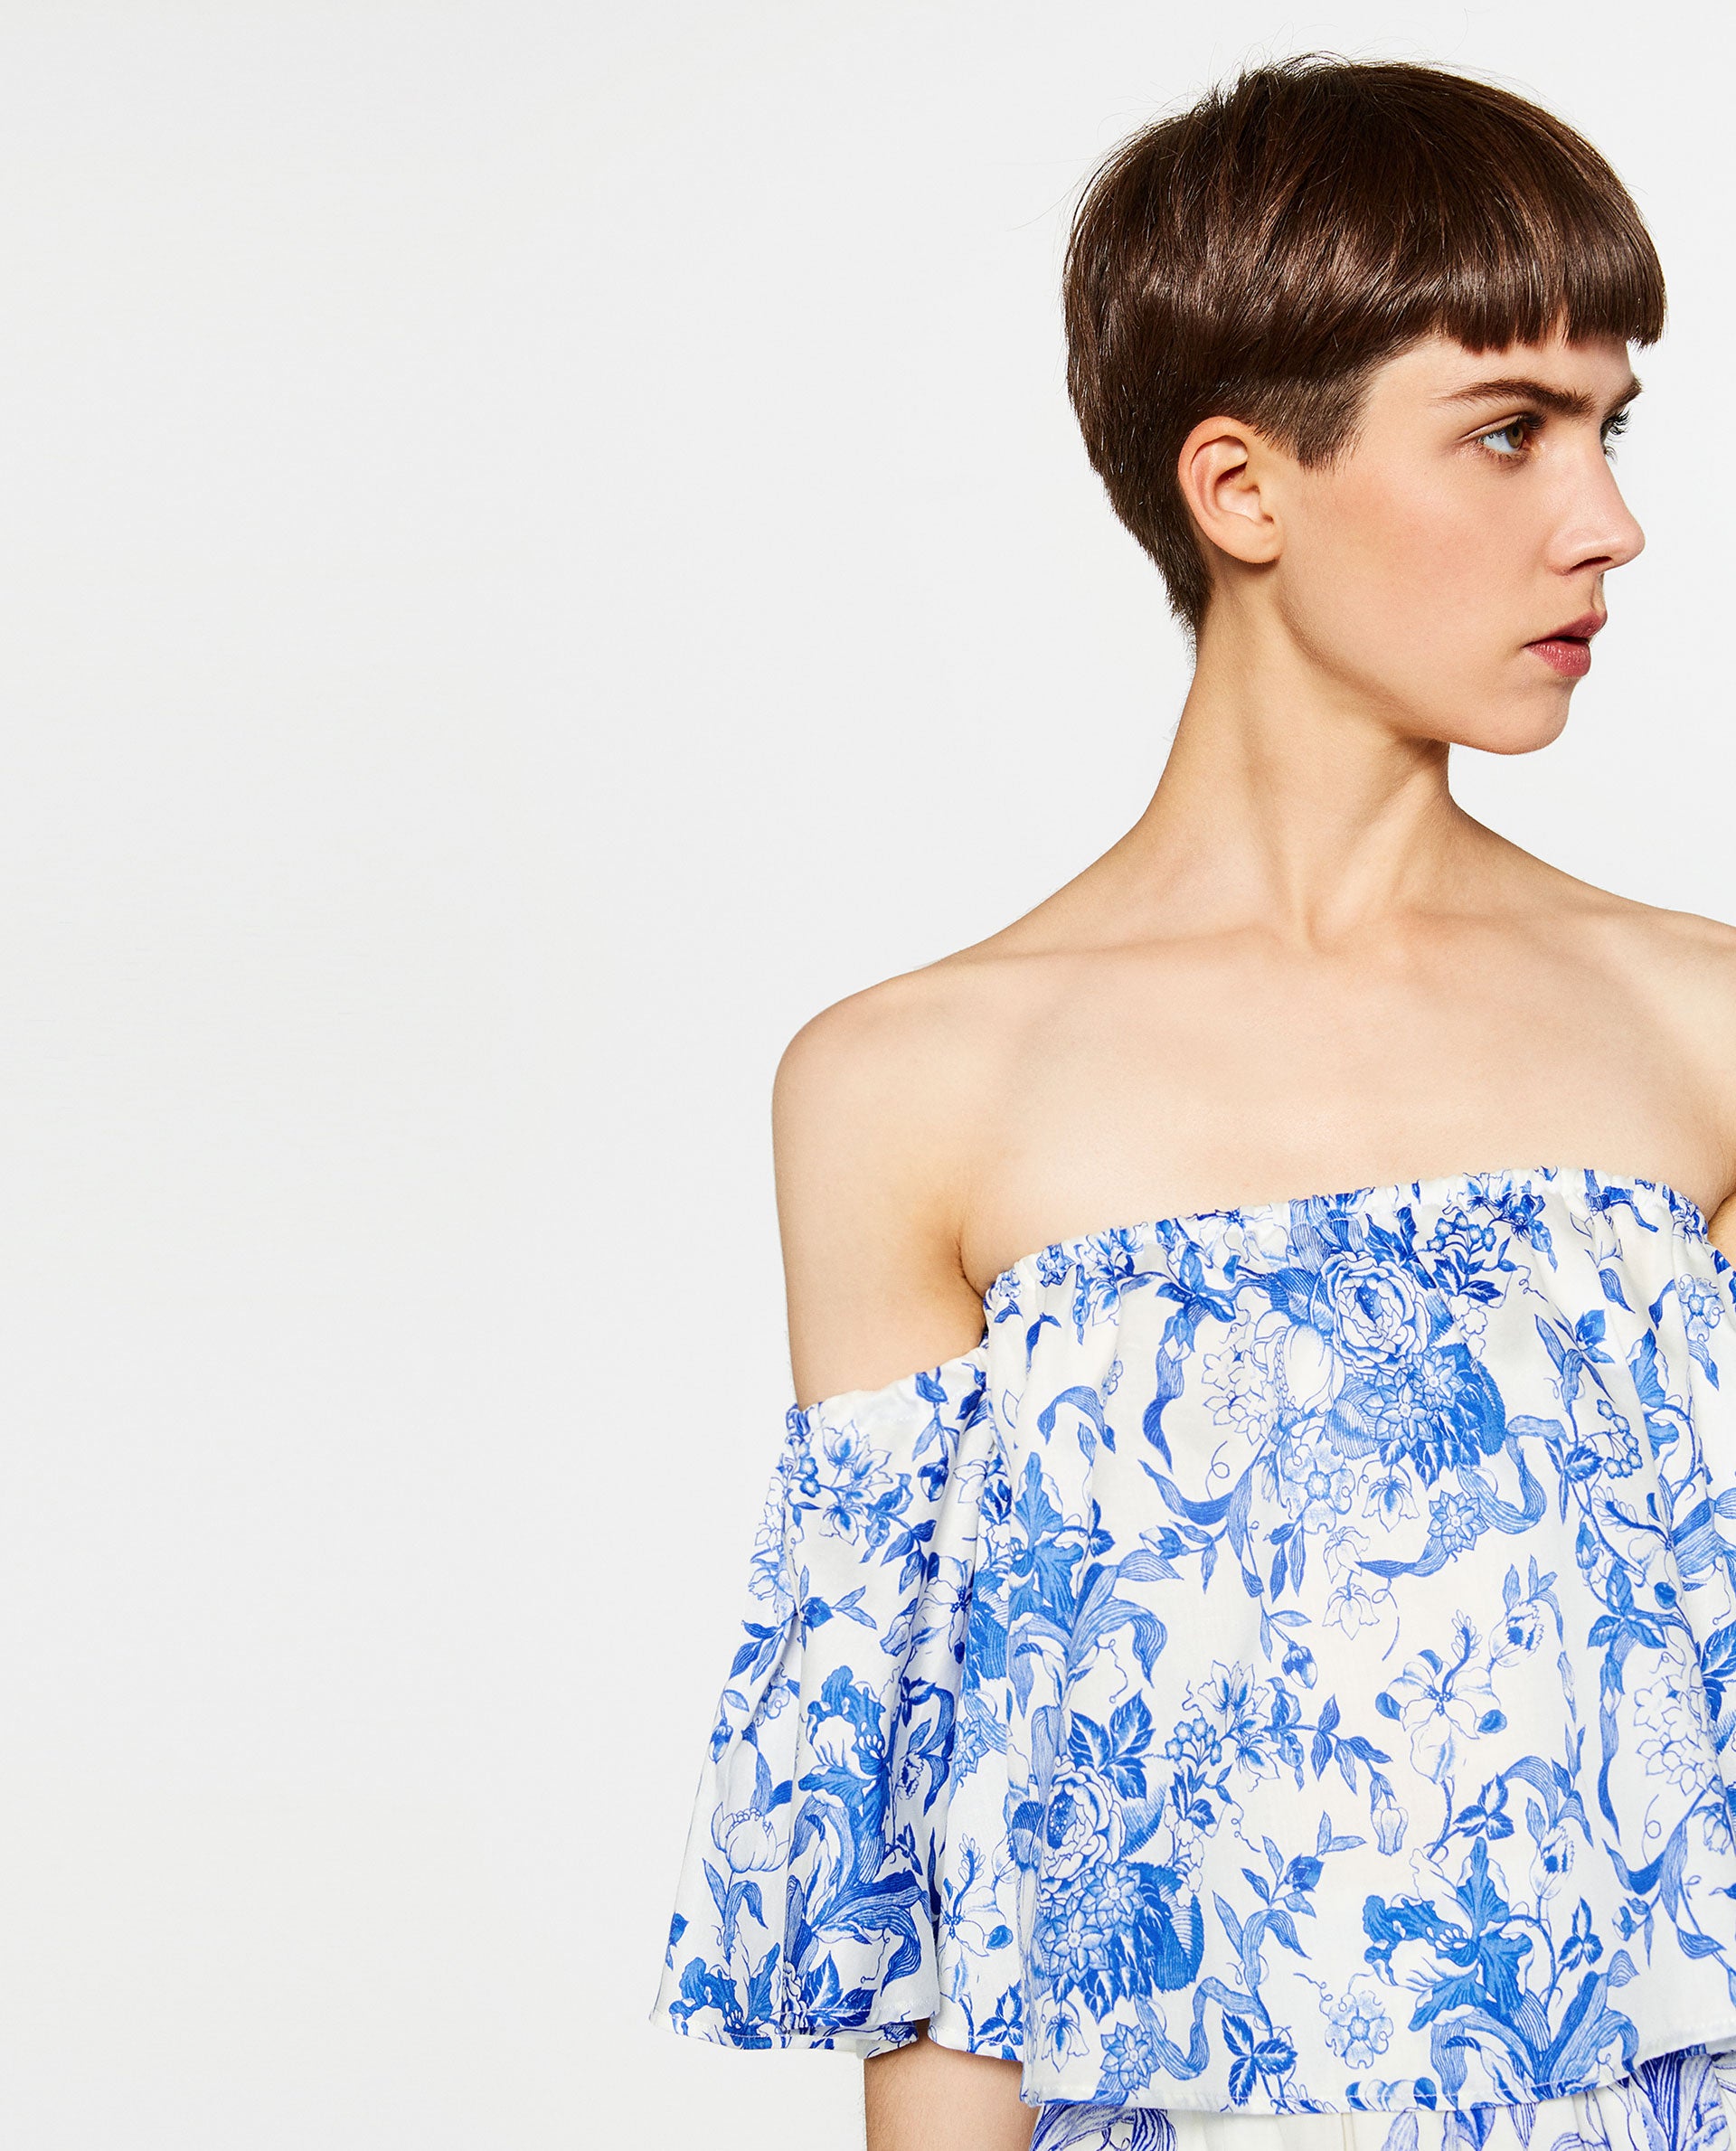 15 Off-The-Shoulder Tops That Deserve a Spot in Your Closet
